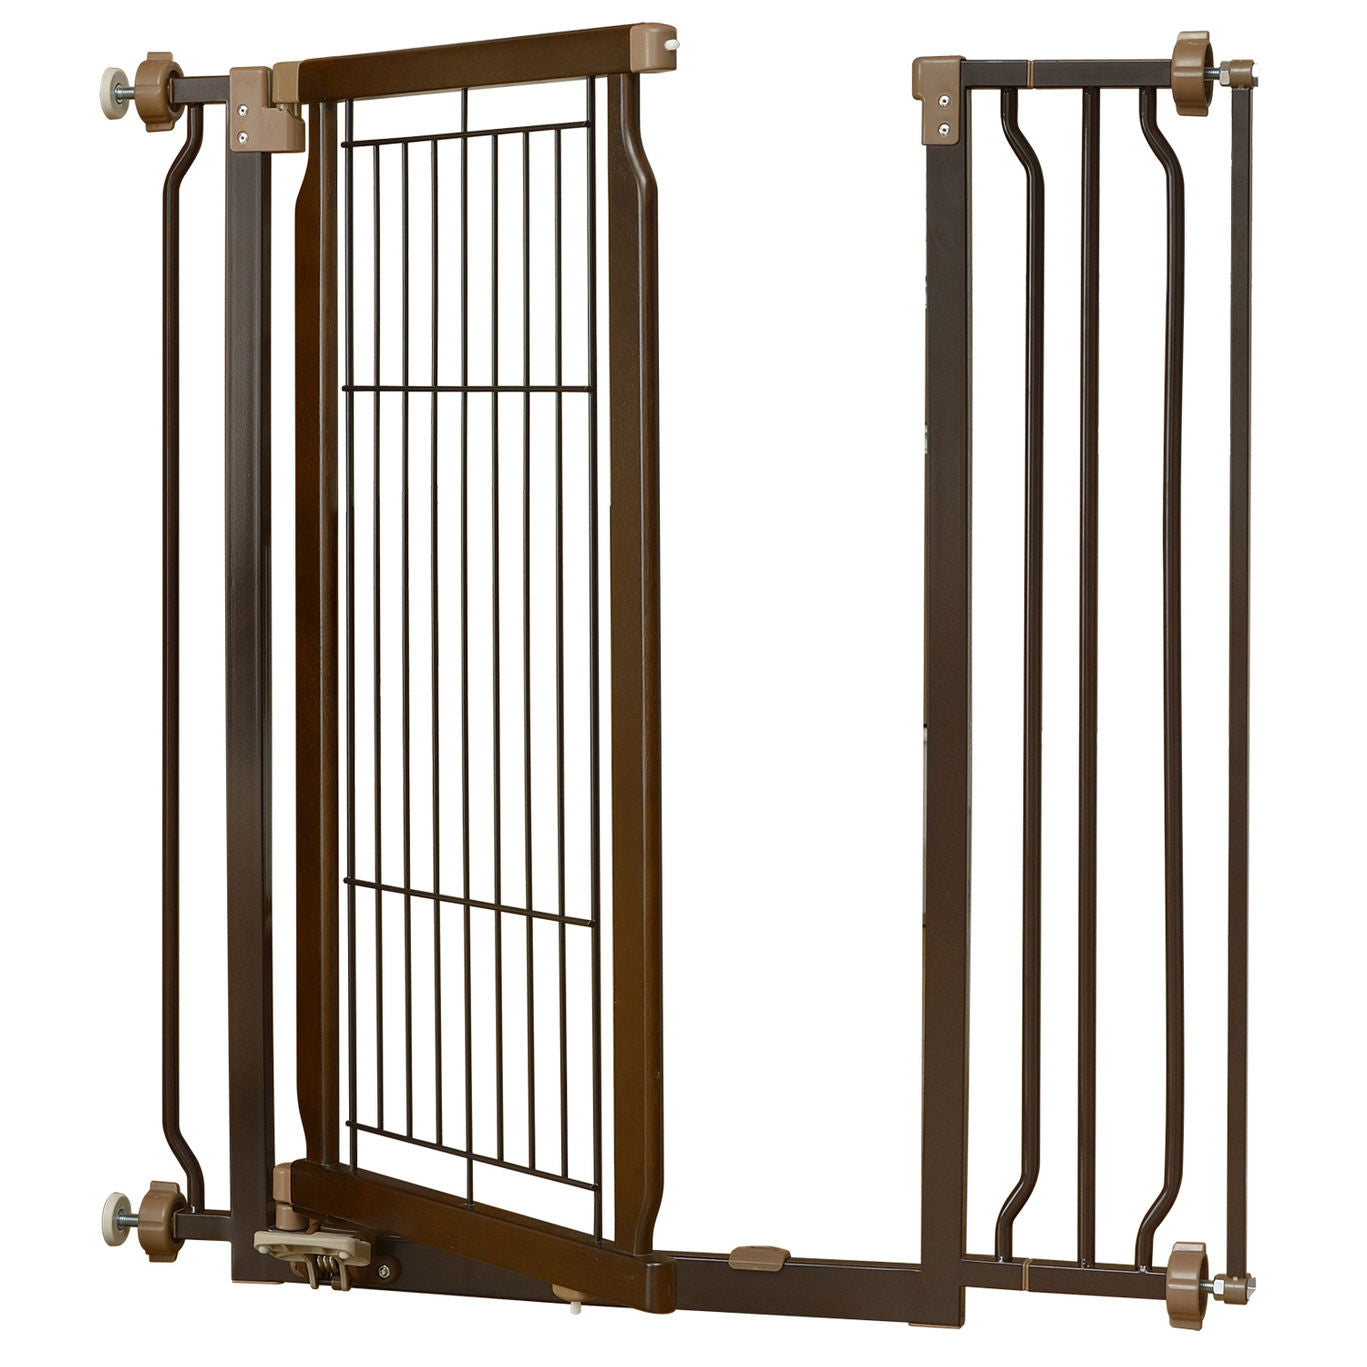 Richell R94903 Hands-free Pressure Mounted Pet Gate